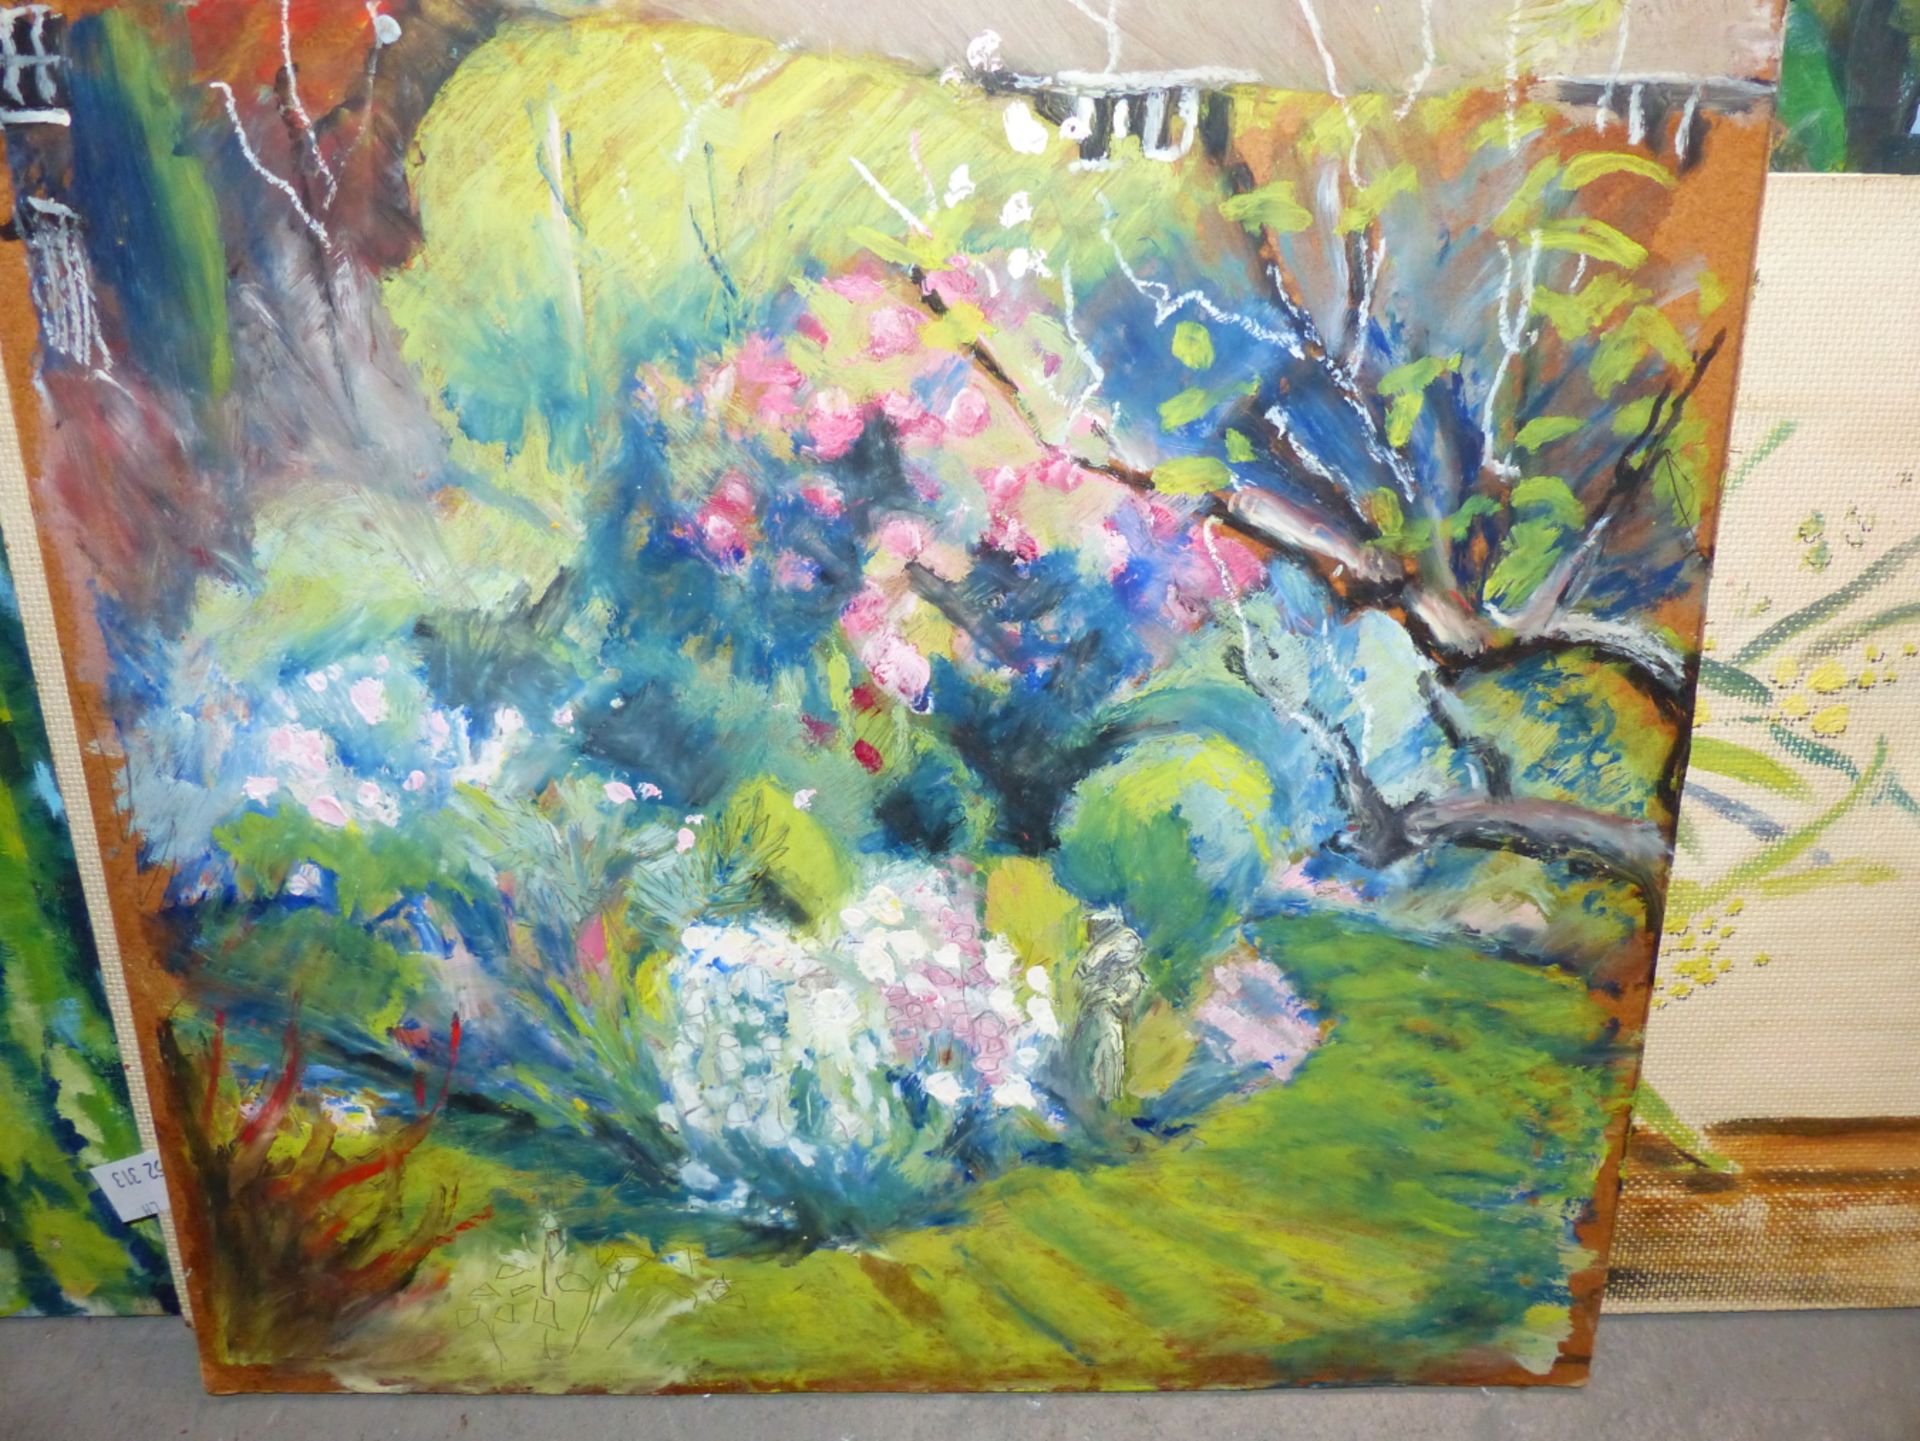 FIVE 20TH CENTURY UNFRAMED OILS ON BOARD OF LANDSCAPES AND GARDENS, ALL INSCRIBED "FROM THE STUDIO - Image 2 of 7